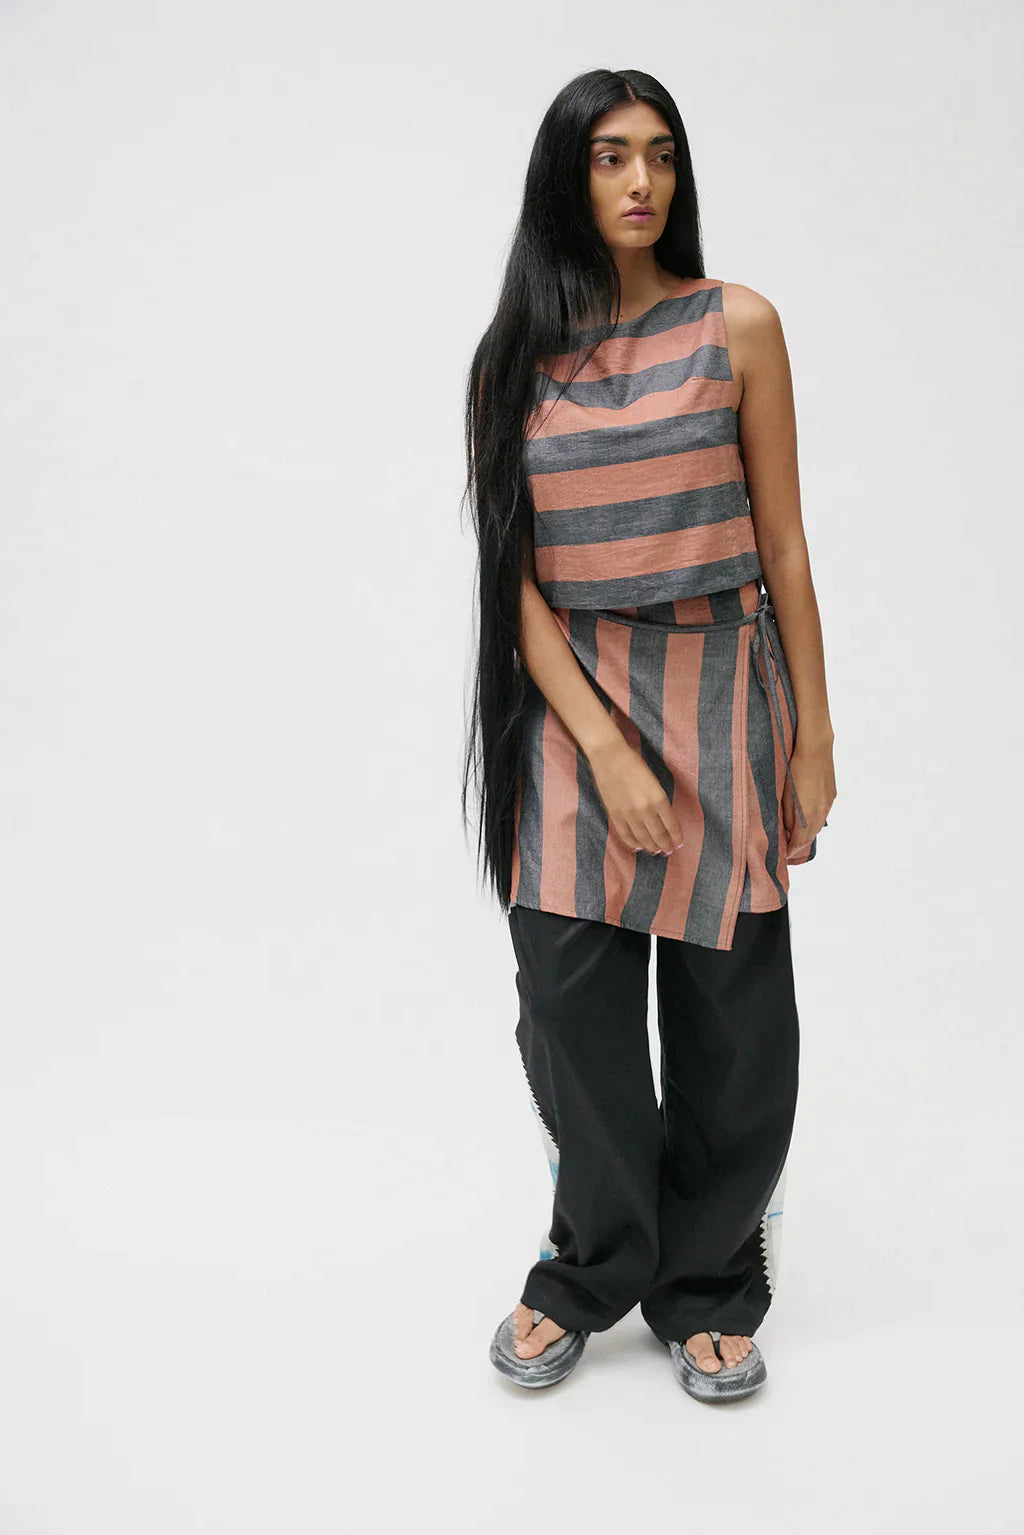 Muse The Label - Mida Top - Brown Stripe